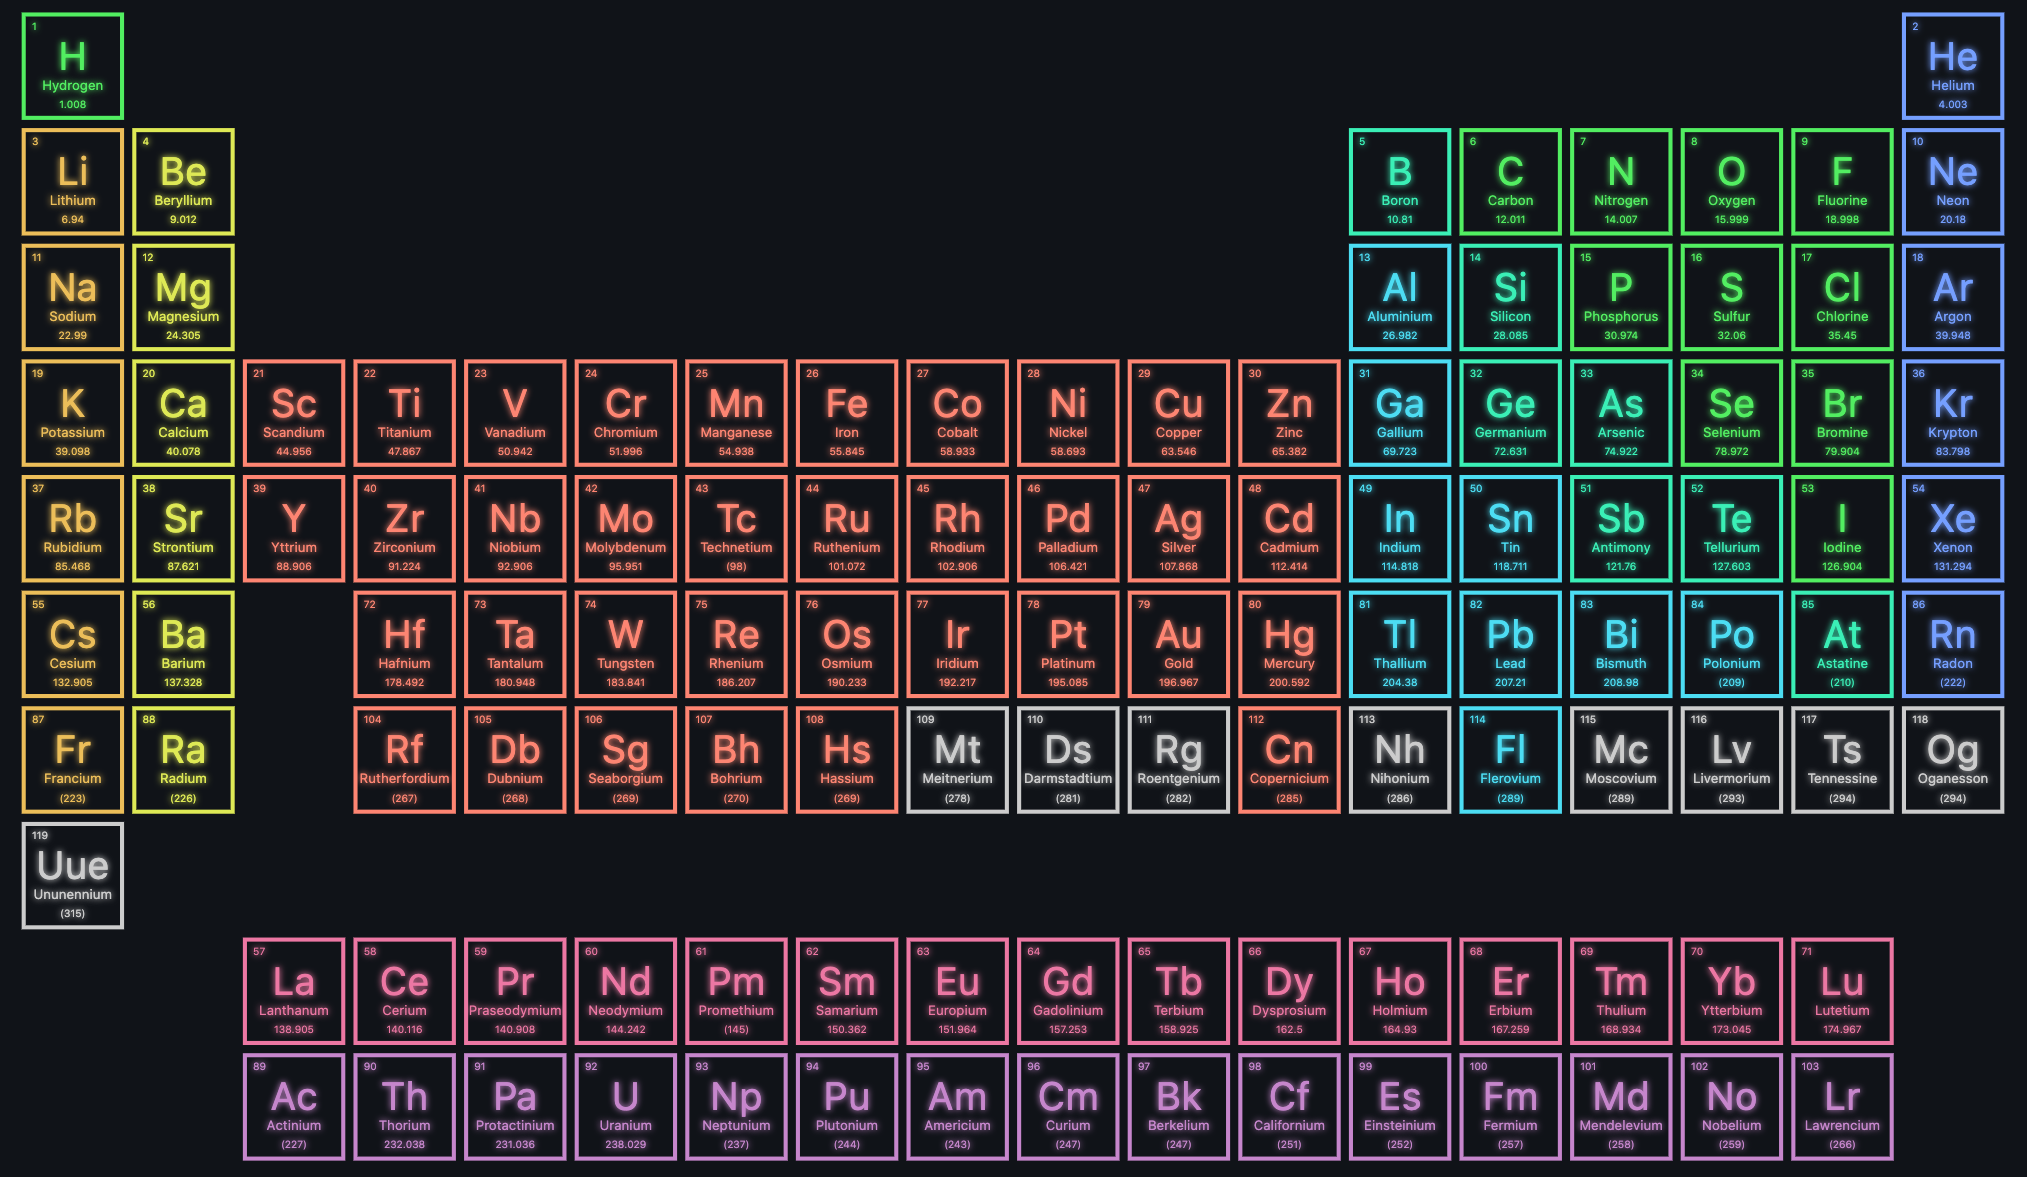 Periodic table rendered using Flutter Layout Grid